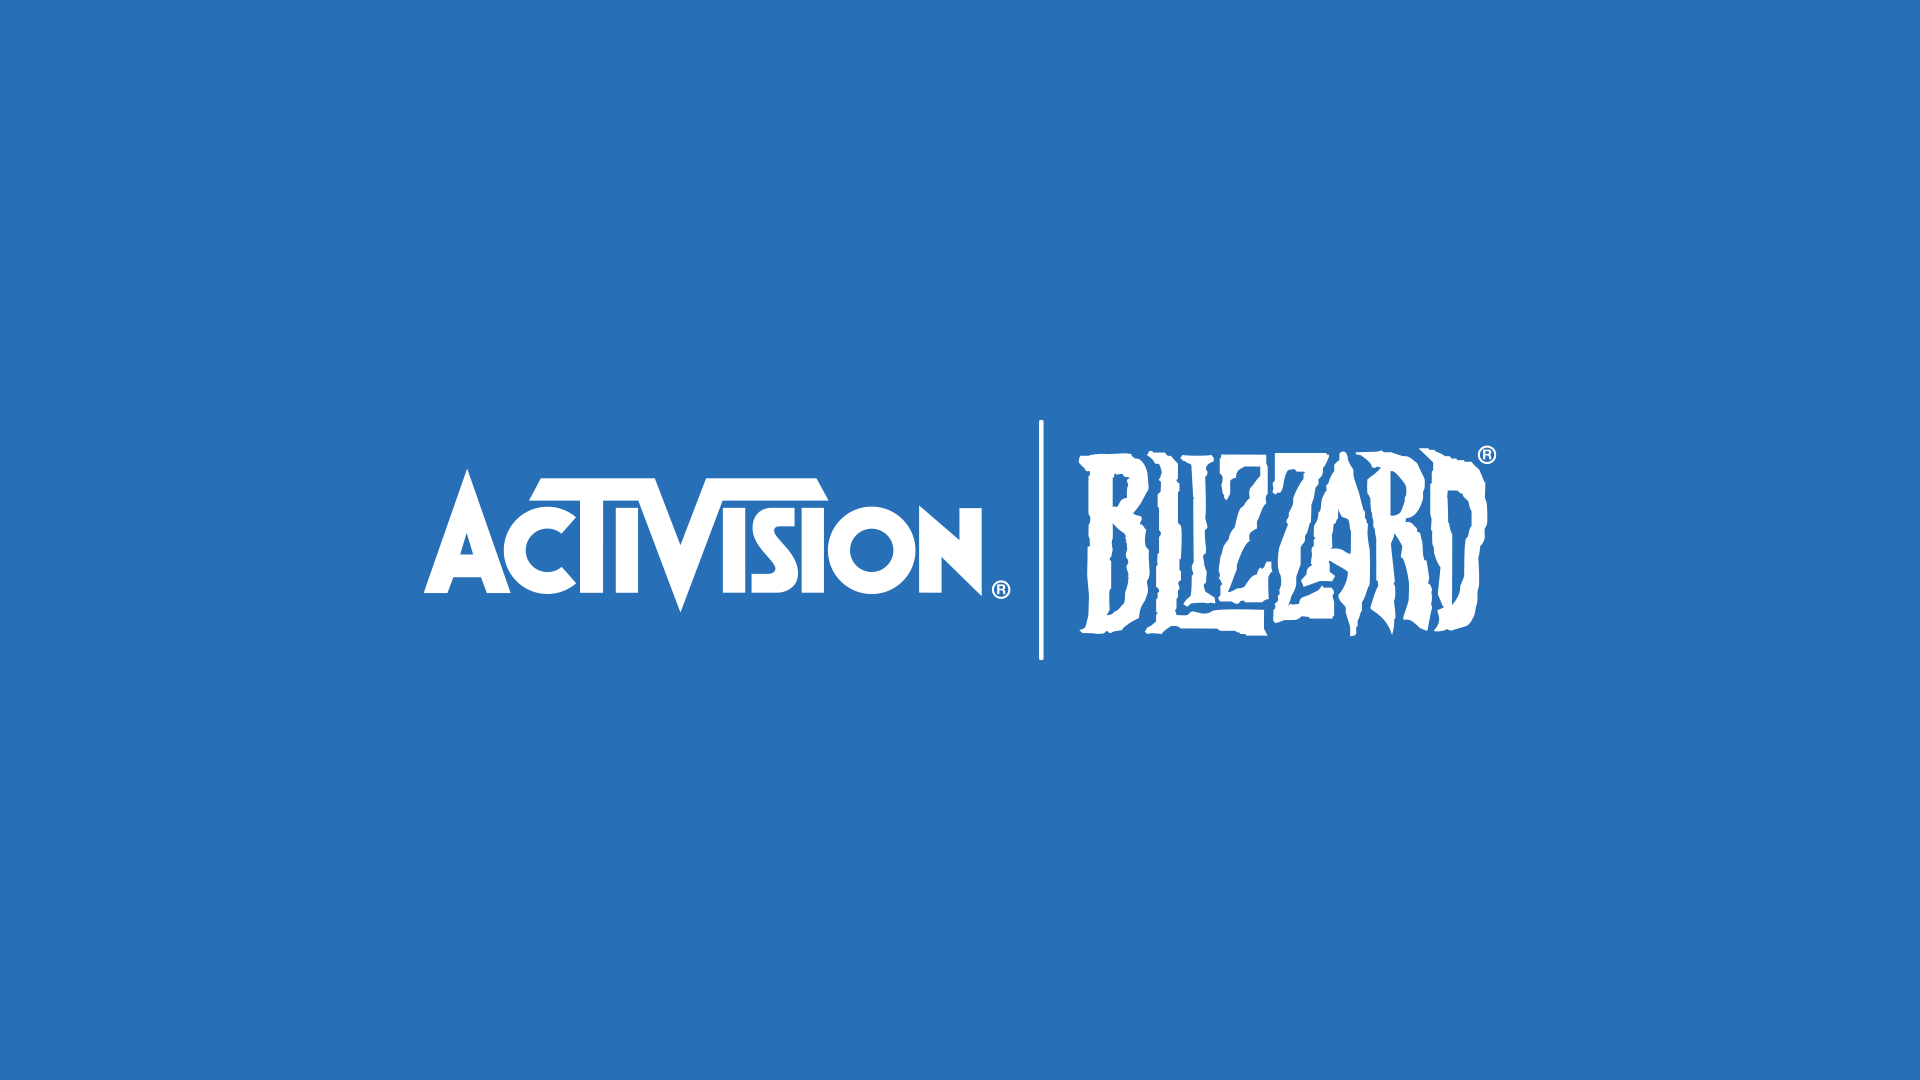 Image for Lawyer demands over $100 million in compensation for Activision Blizzard harassment victims